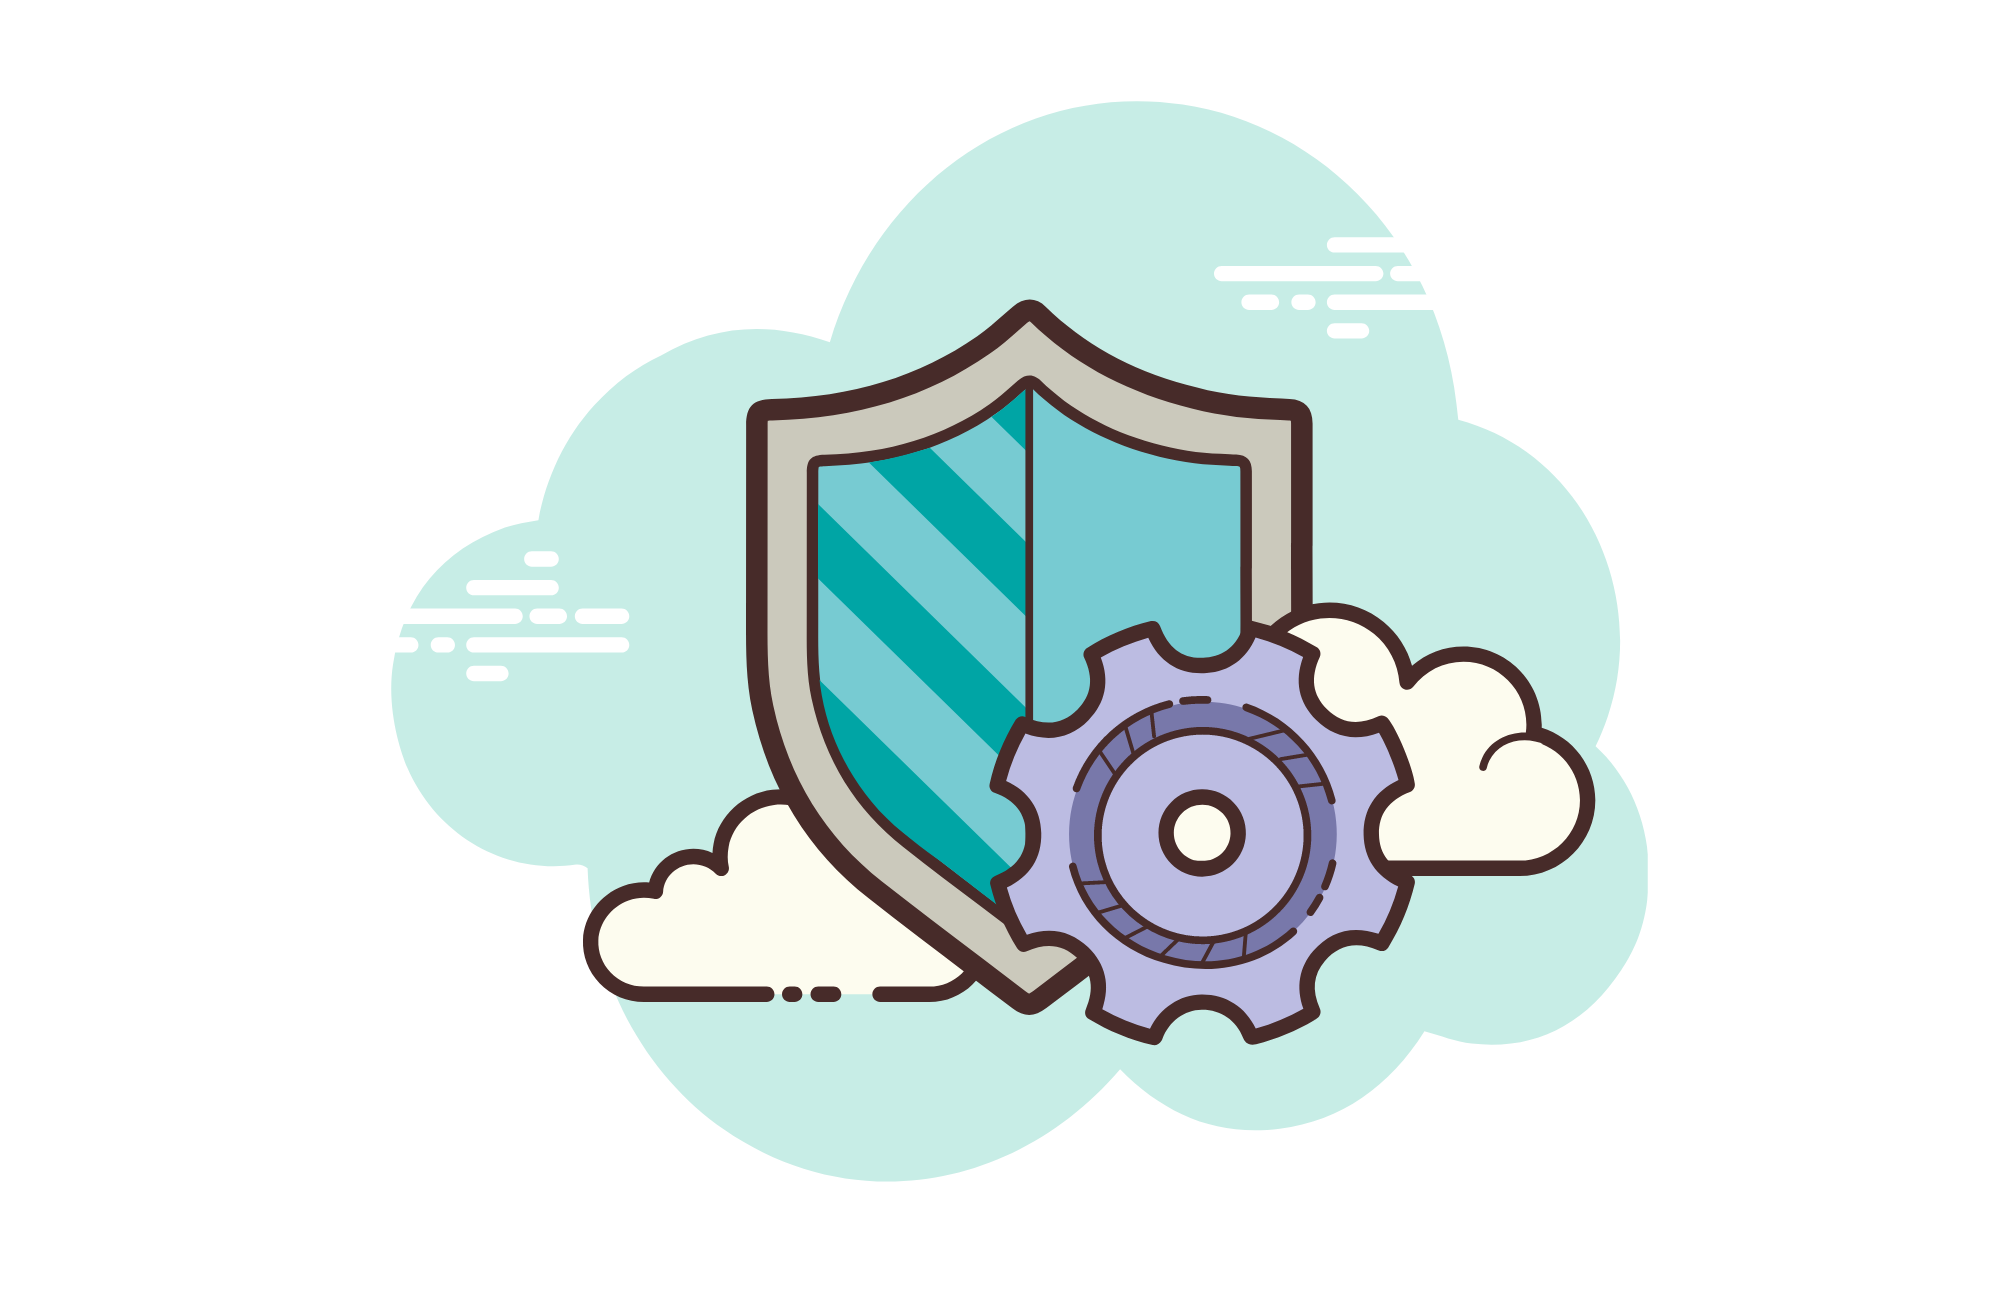 graphic of a shield with a gear icon and clouds to protect merchants form the paypal chargeback fee